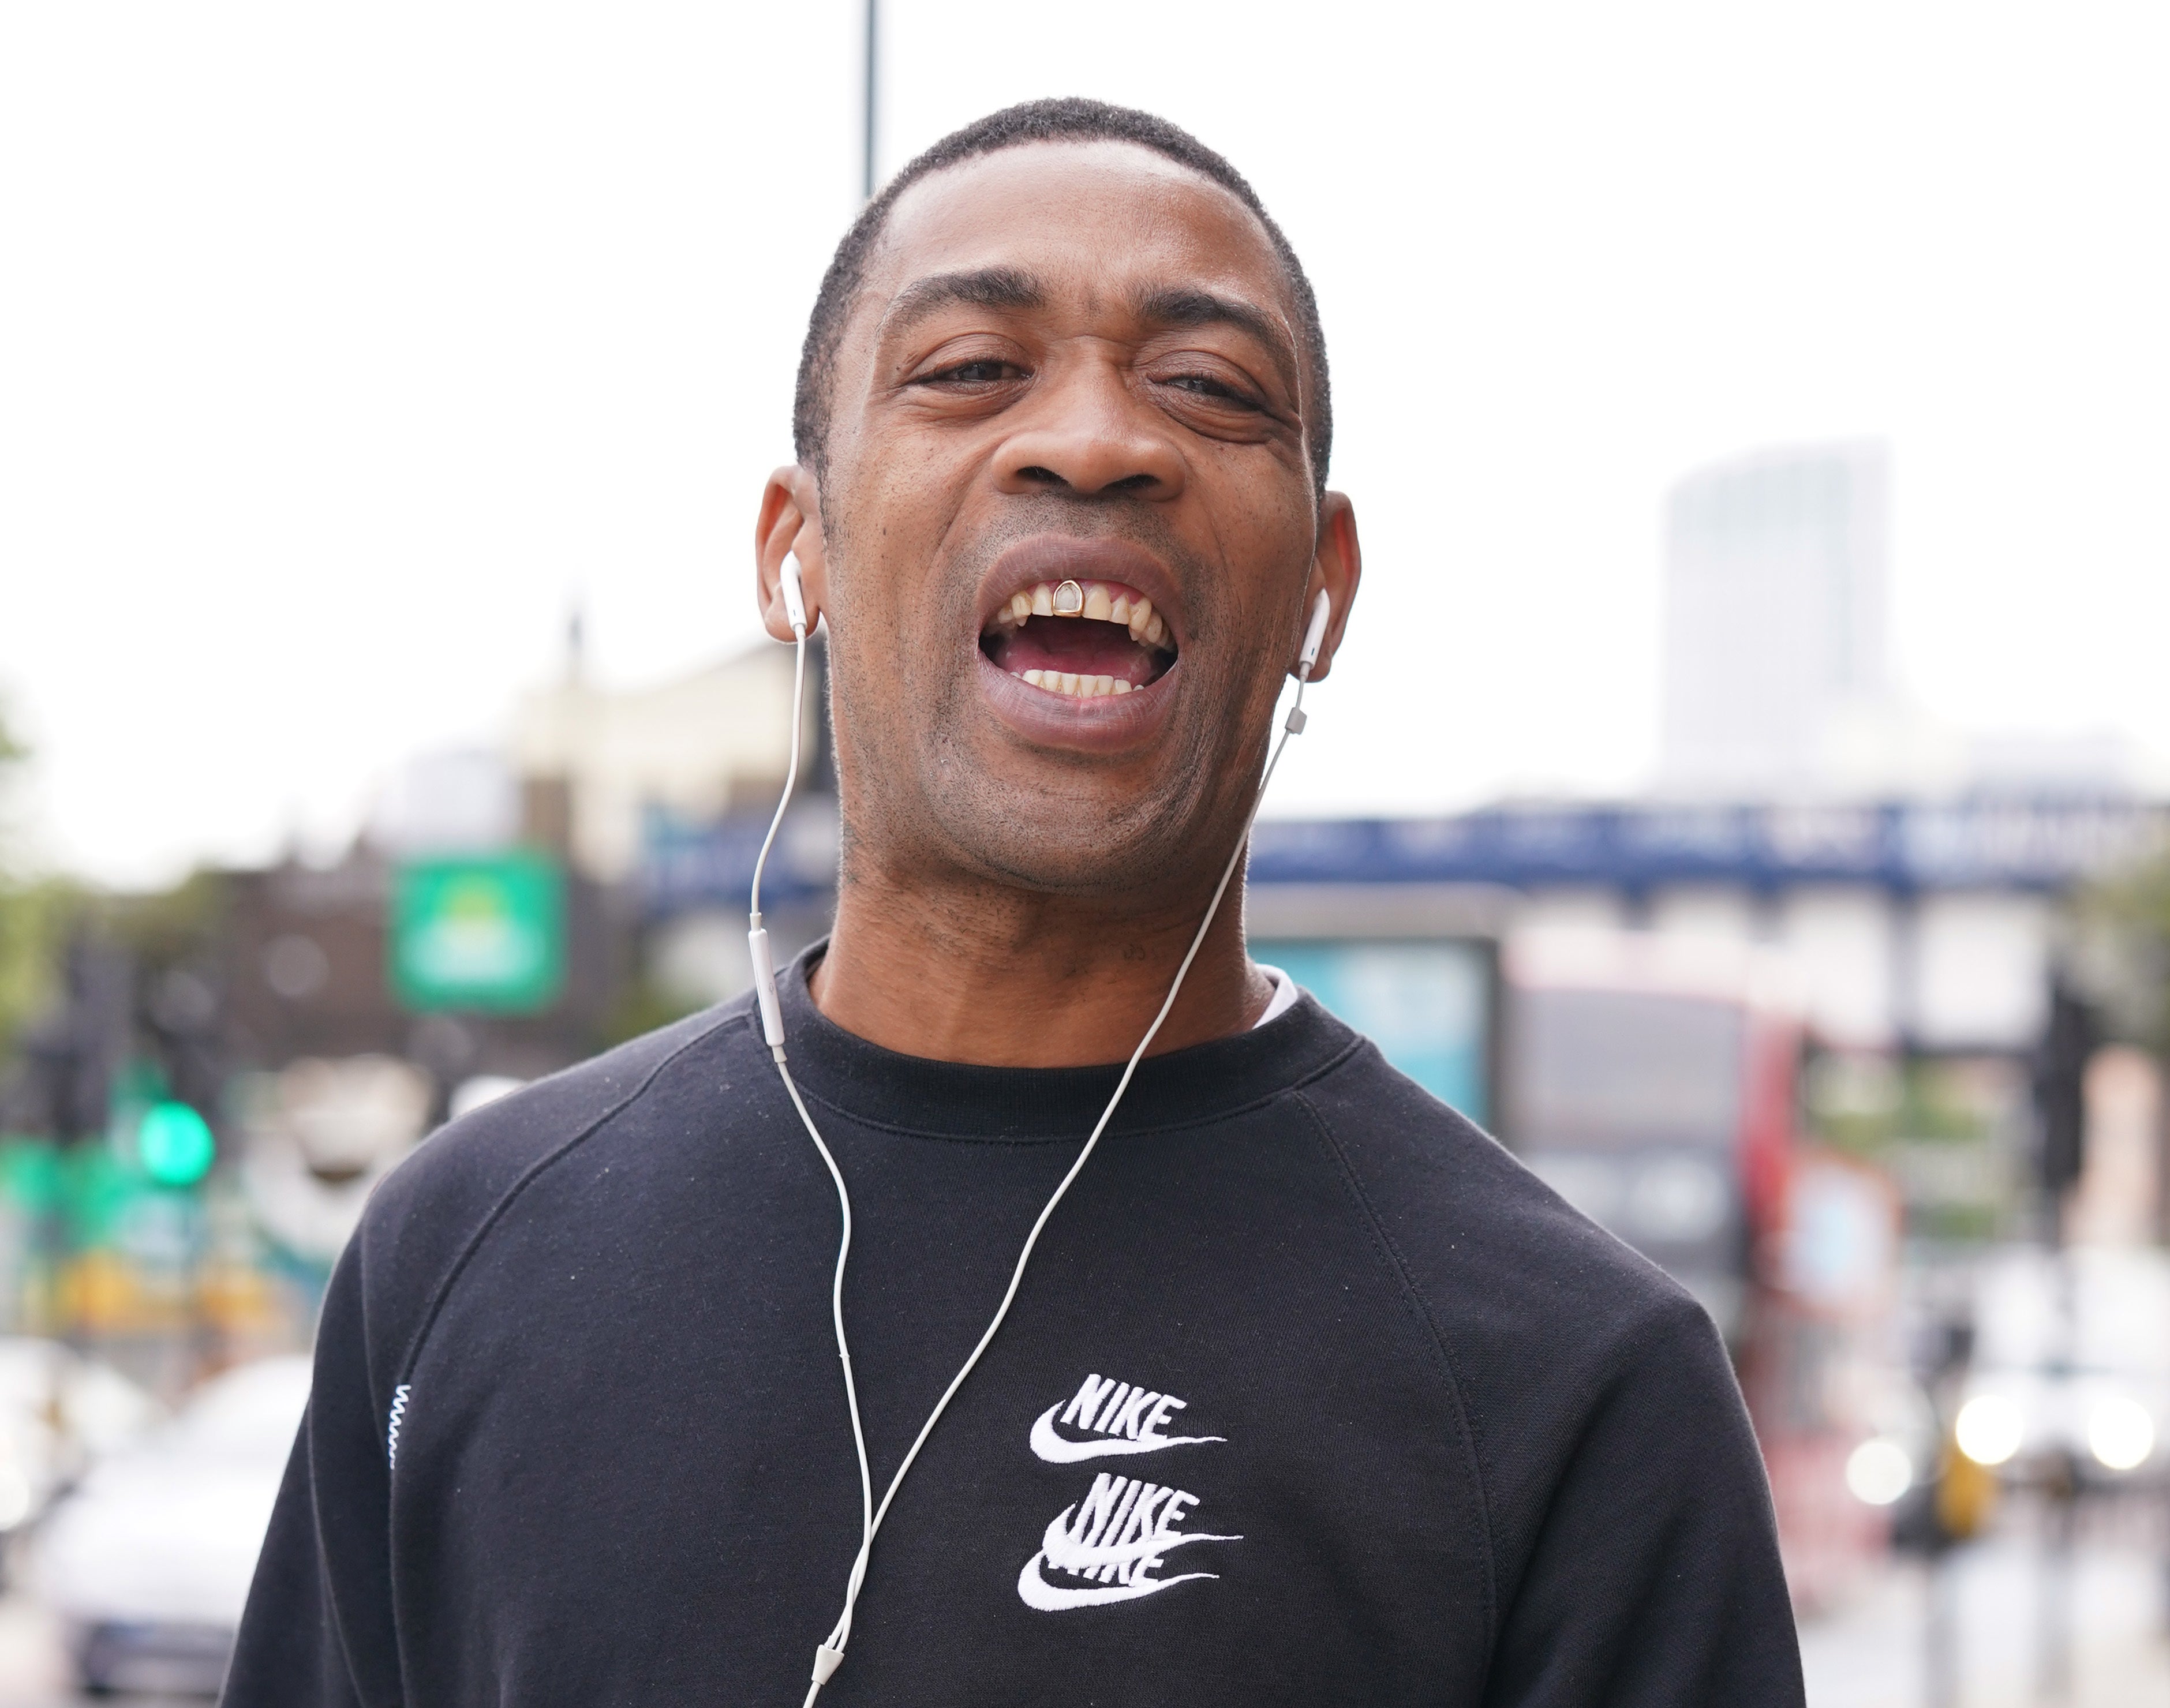 Wiley arrives at Thames Magistrates’ Court